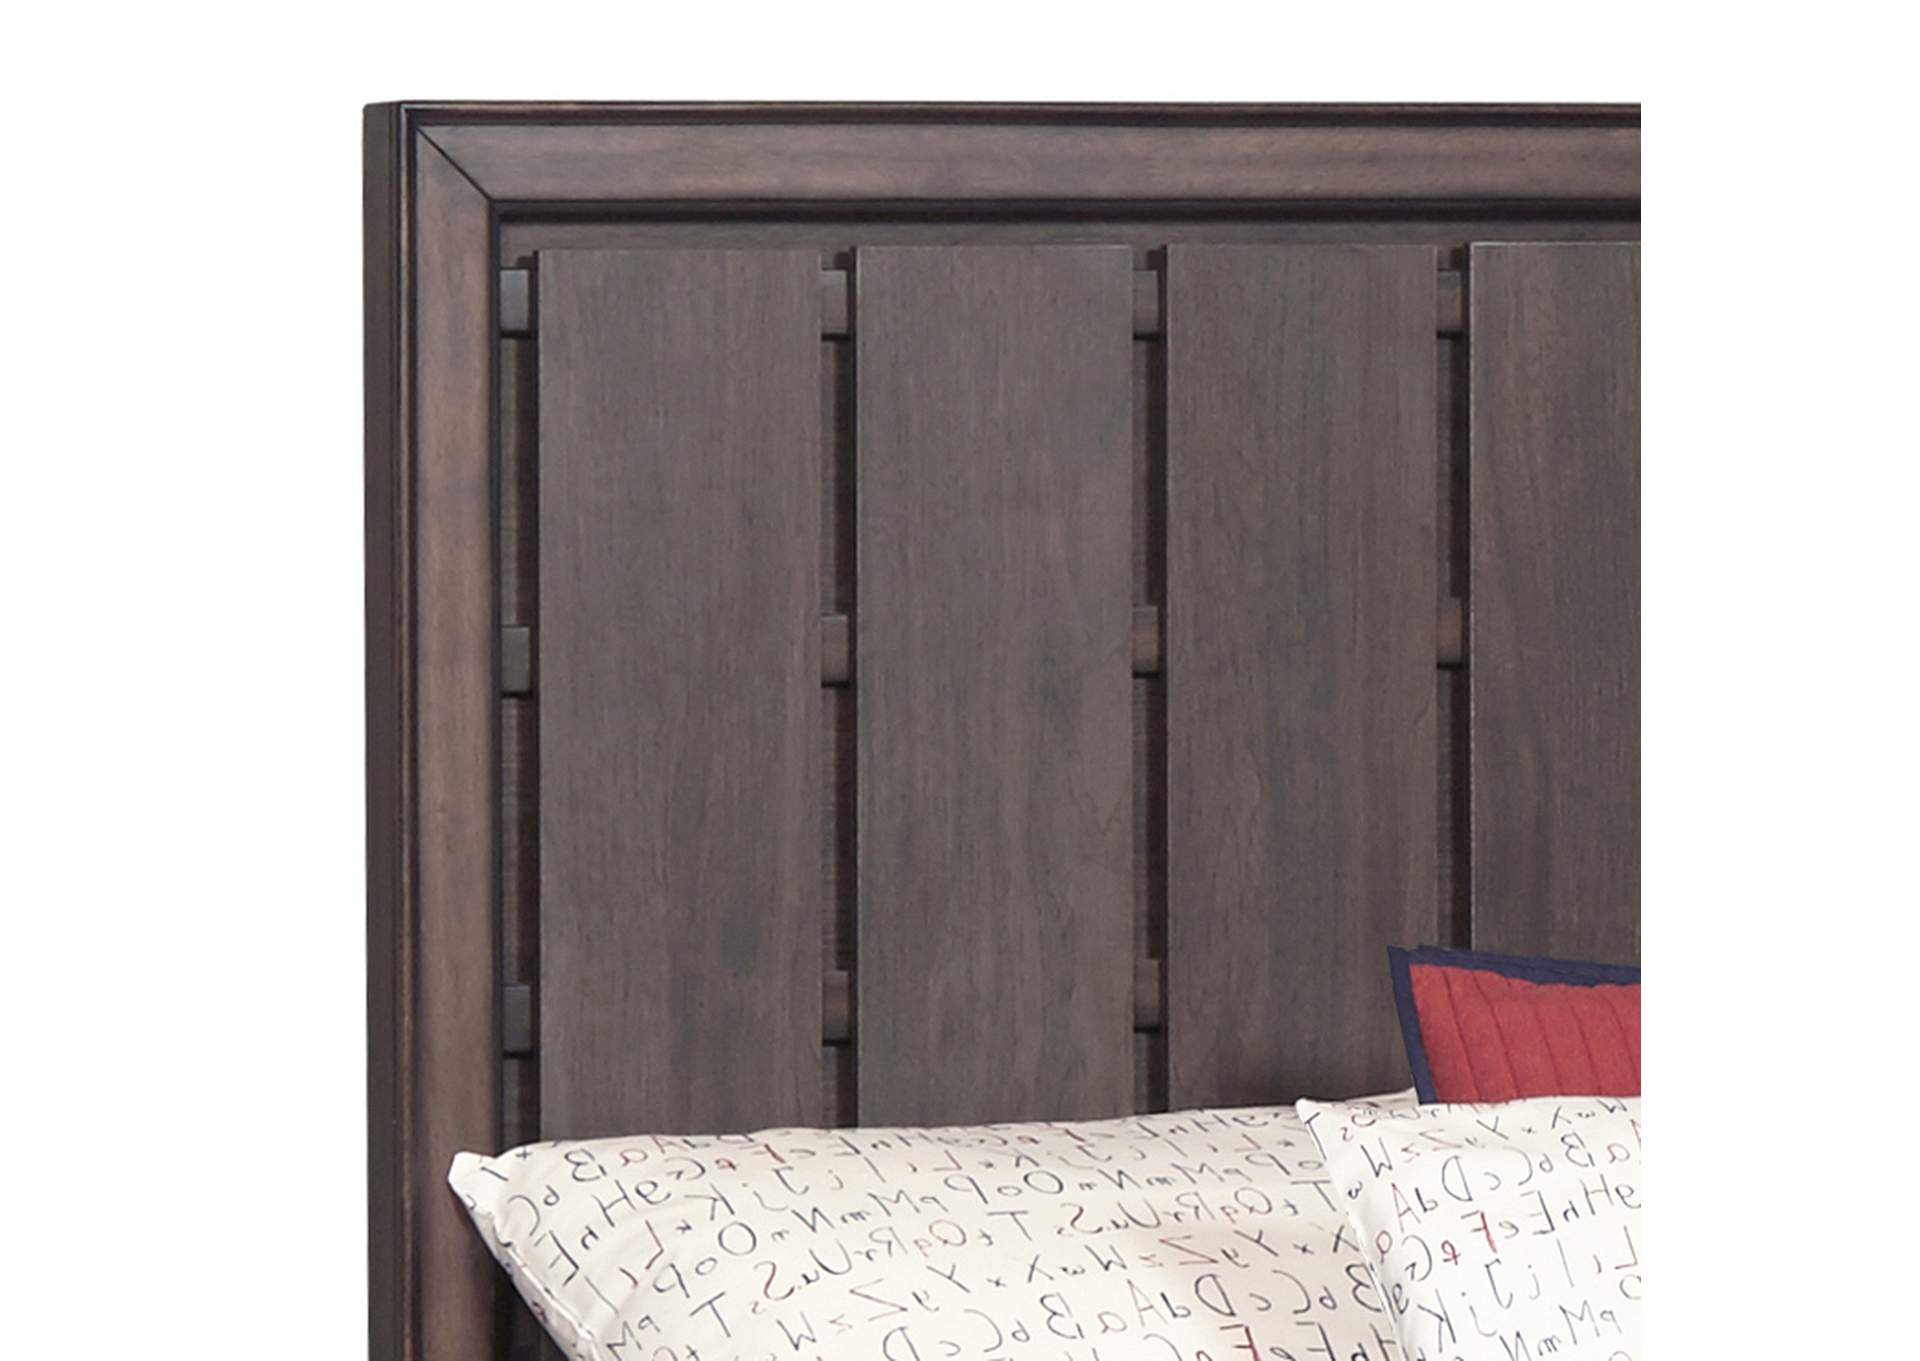 Kids Twin Panel Bed with Trundle in Espresso Brown,Pulaski Furniture